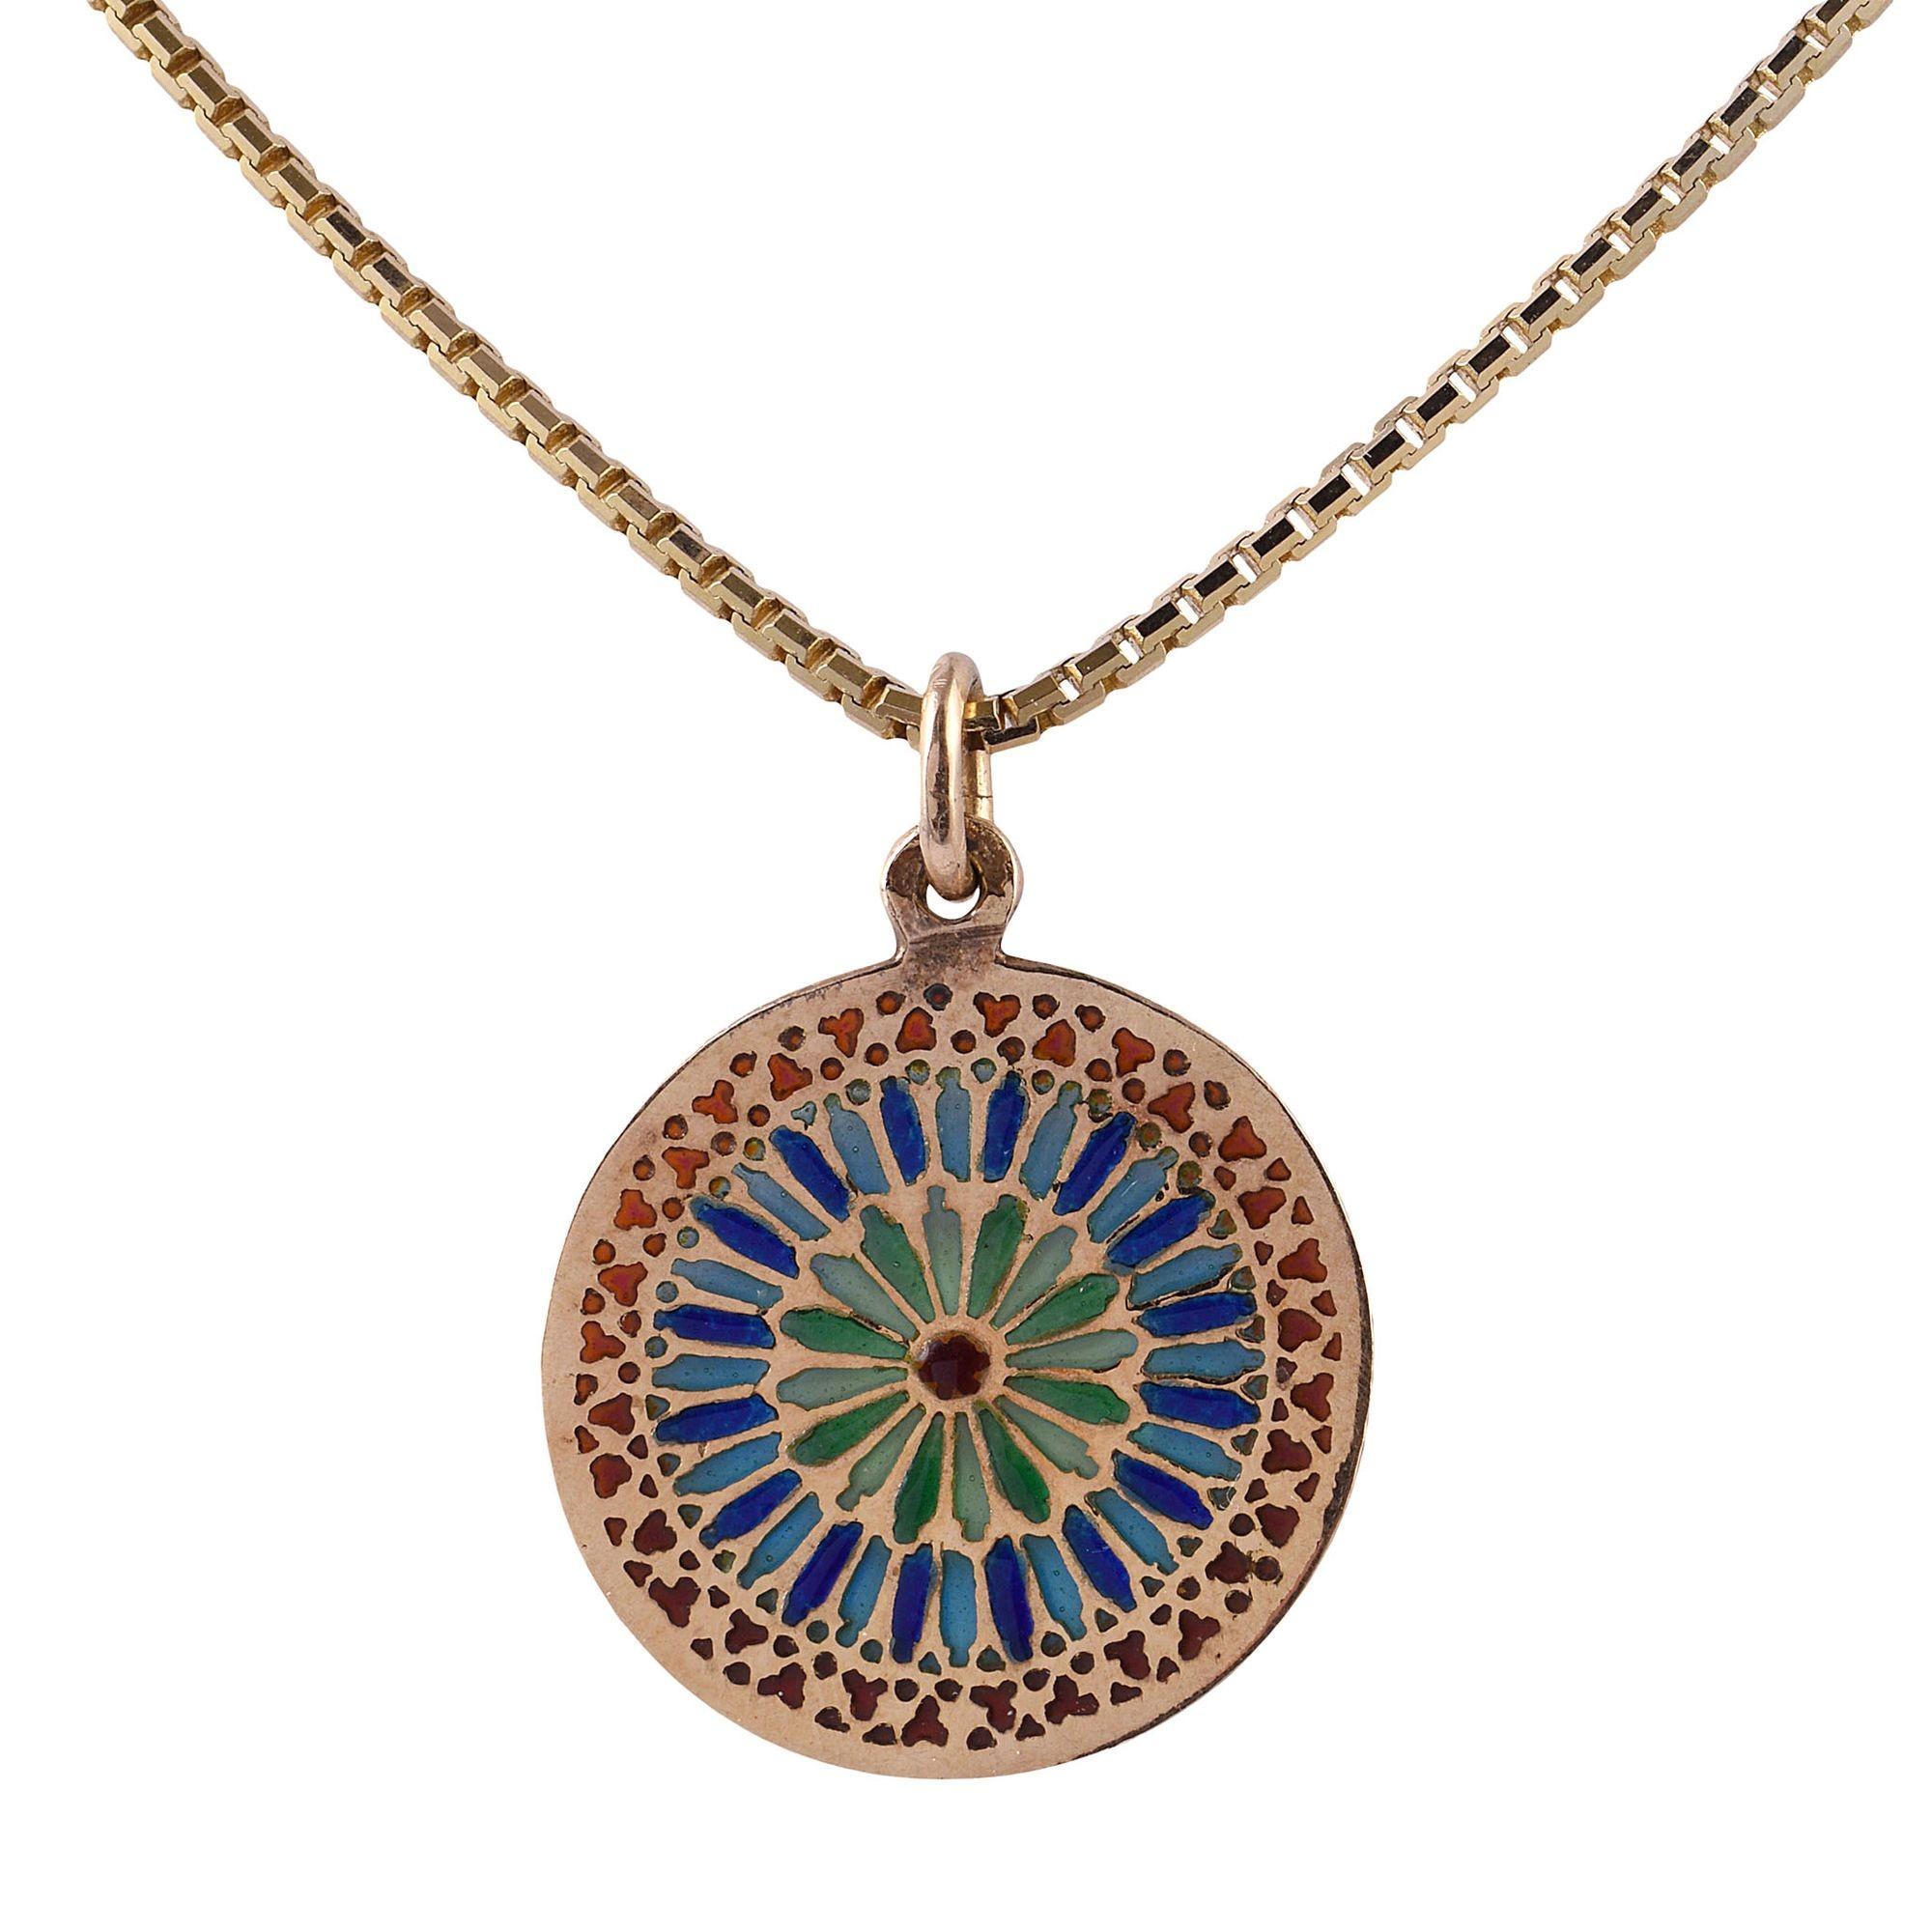 Vintage Plique A Jour enamel pendant necklace. This beautiful round pendant is crafted in 18 karat gold with plique a jour enamel in an intricate mandala style pattern. The vintage enamel pendant comes on a 14 karat gold Italian made chain. [KIMH